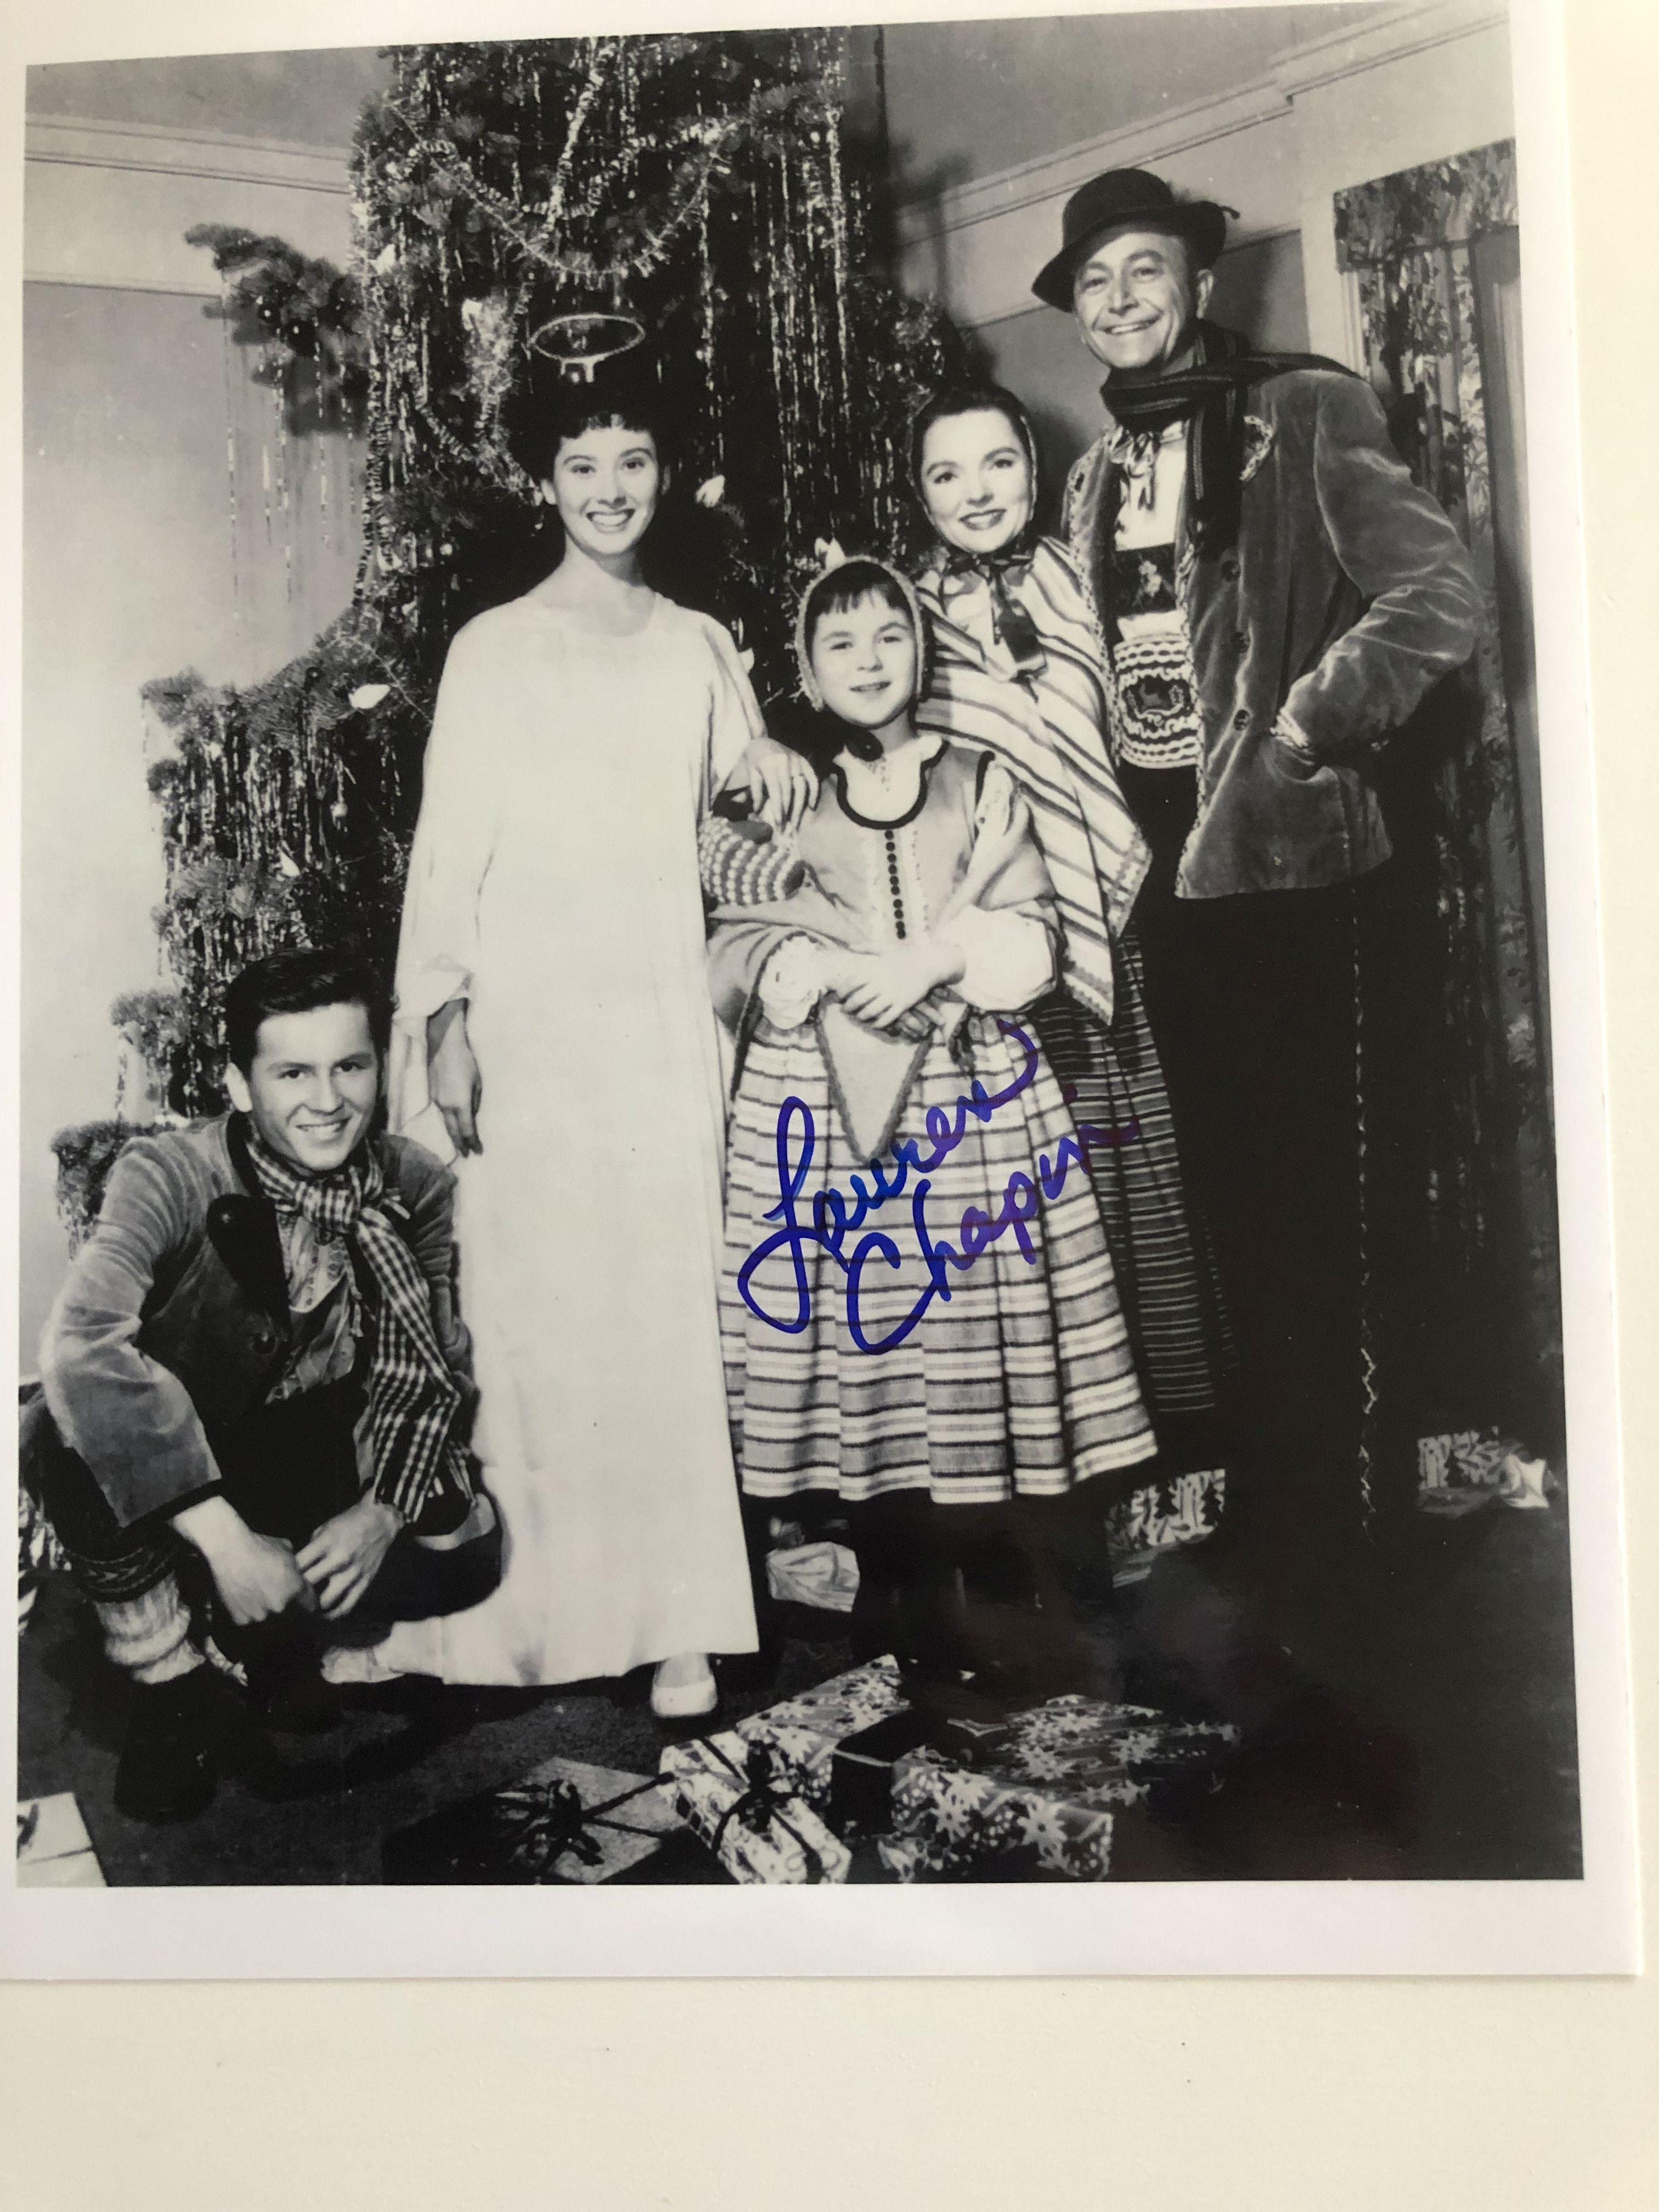 Photos of the cast from Father Knows Best autographed by Lauren Chapin.